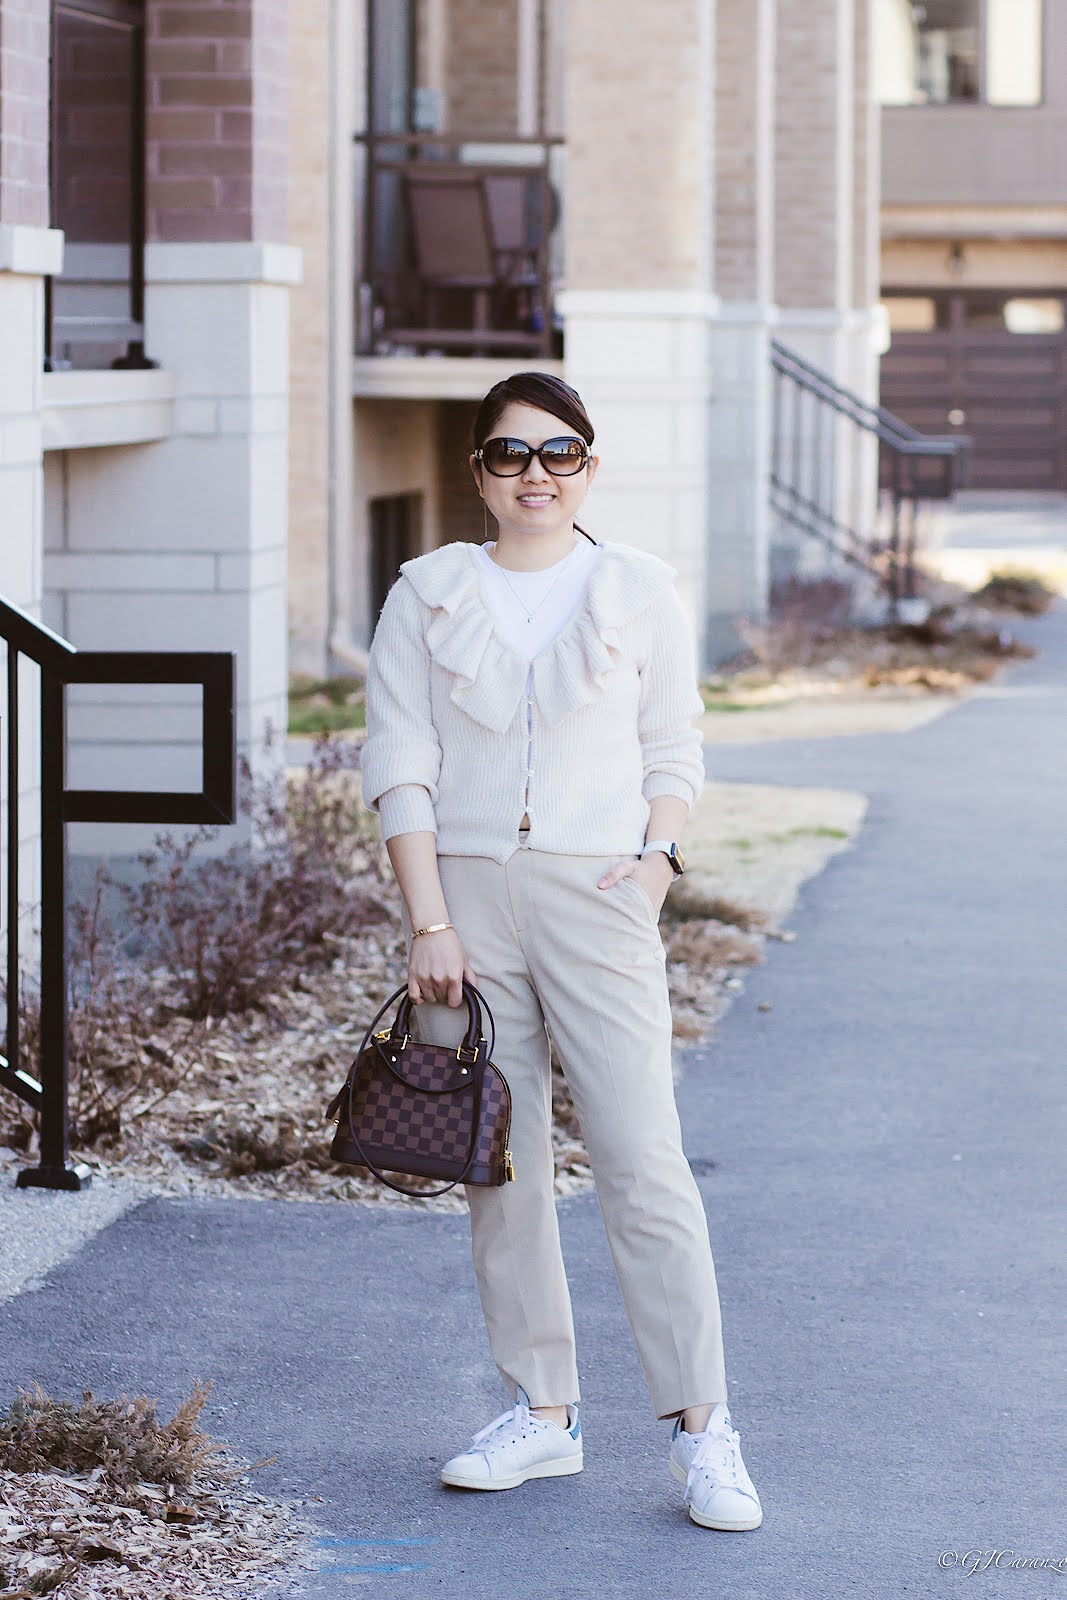 H&M Knit Cardigan_Banana Republic Pants_Adidas Stan Smith_Louis Vuitton AlmaBB_Gucci Sunglasses_Spring Outfit_Mom Style_Petite Fashion_Neutral Outfit